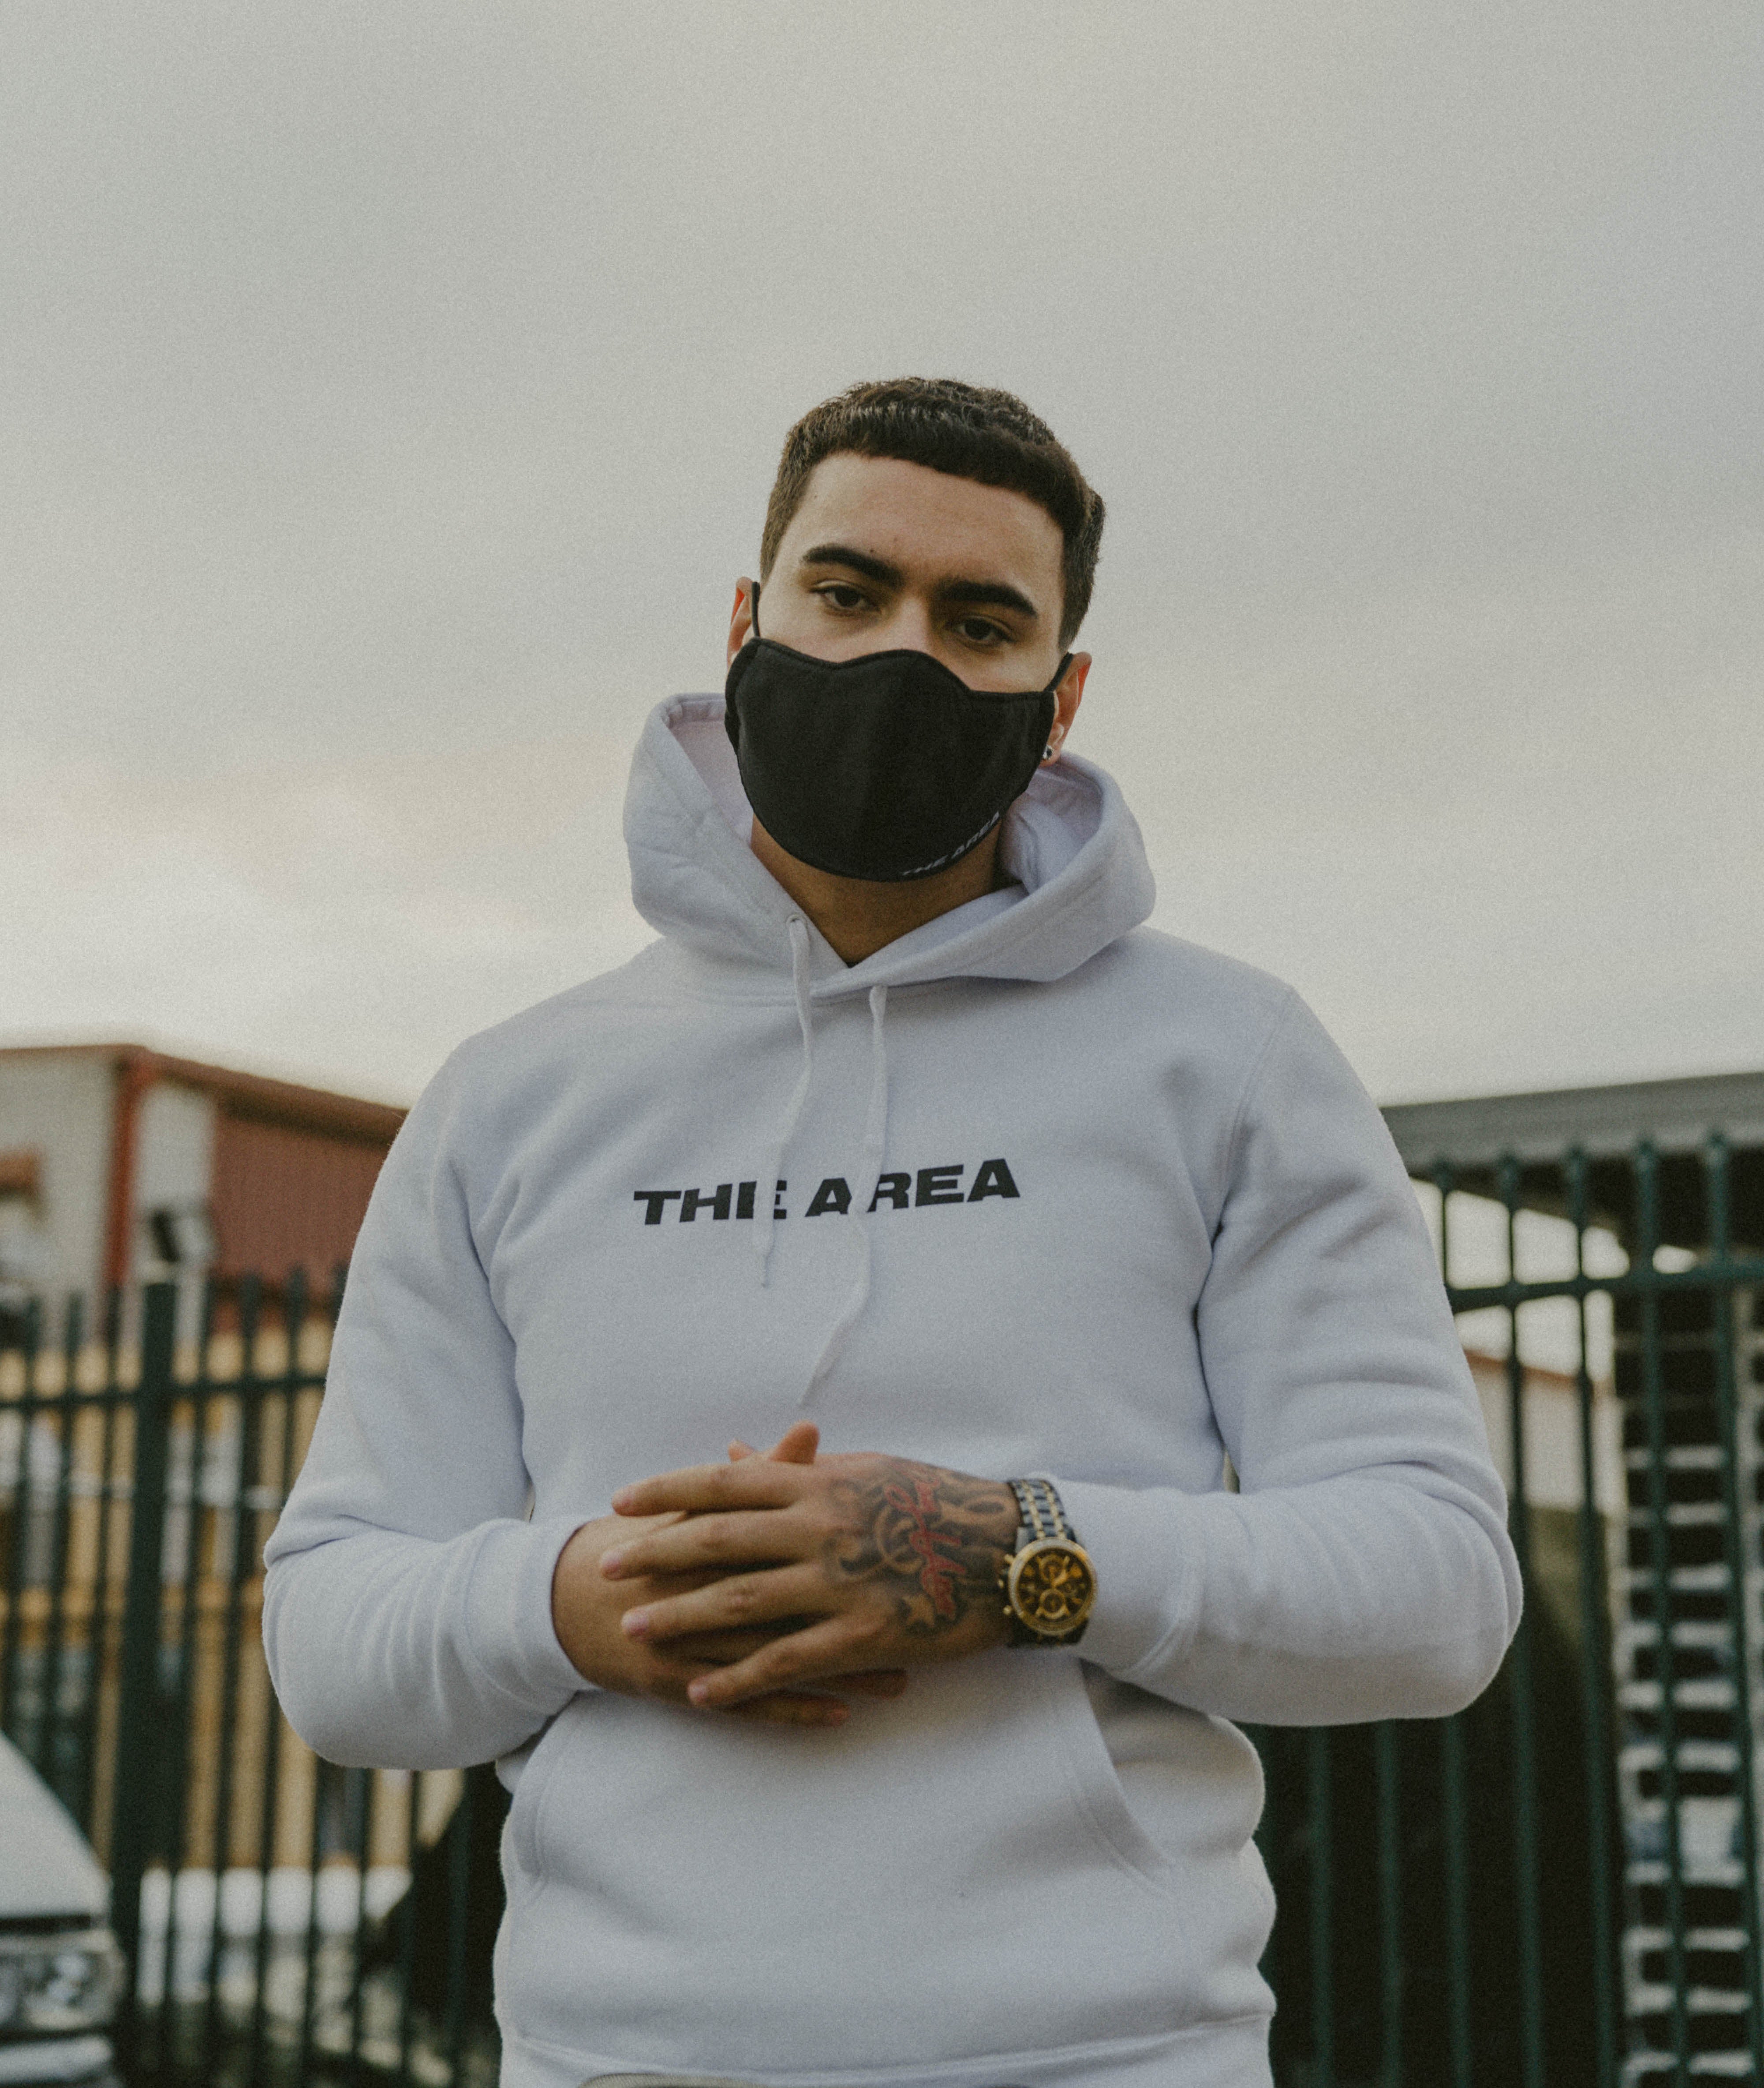 THE AREA MOVEMENT WHITE HOODIE